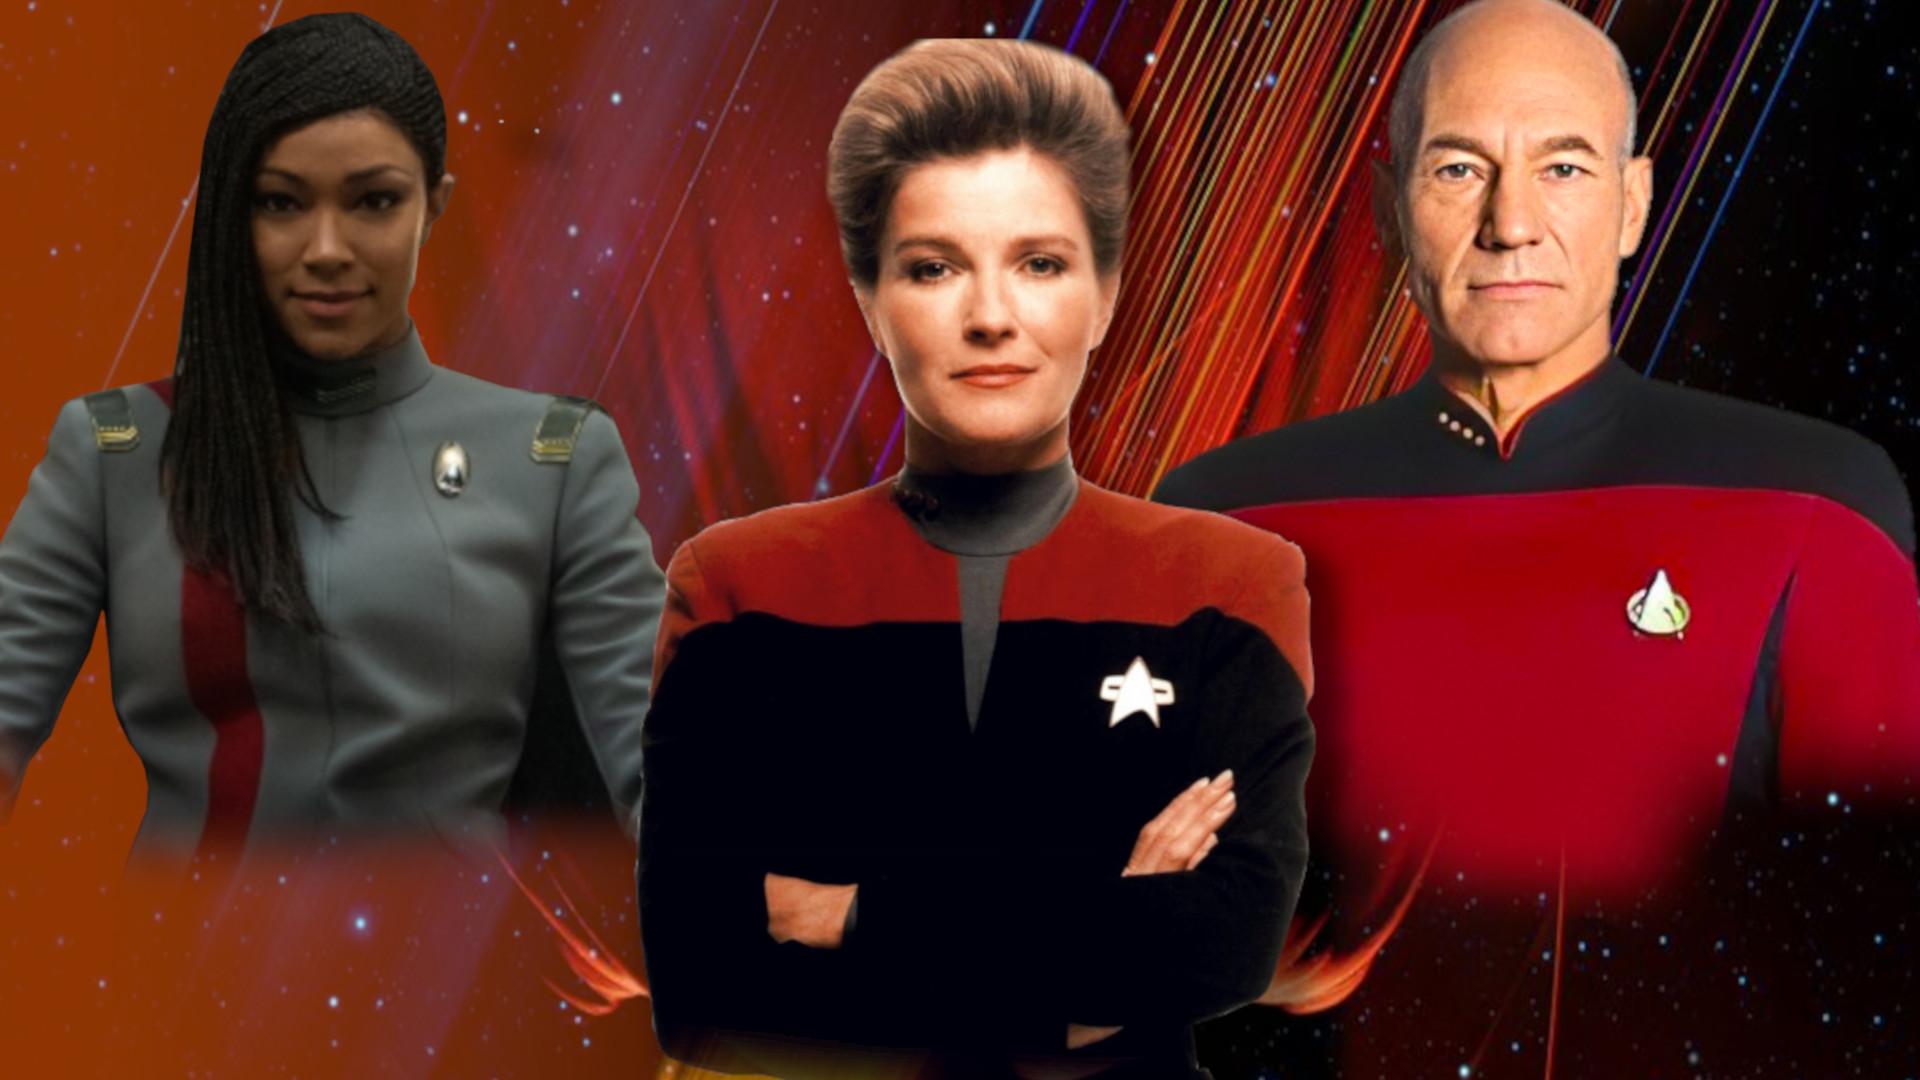 A picture of the Star Trek captains, Michael Burnham,Kathryn Janeway, anmd Jean Luc Picard